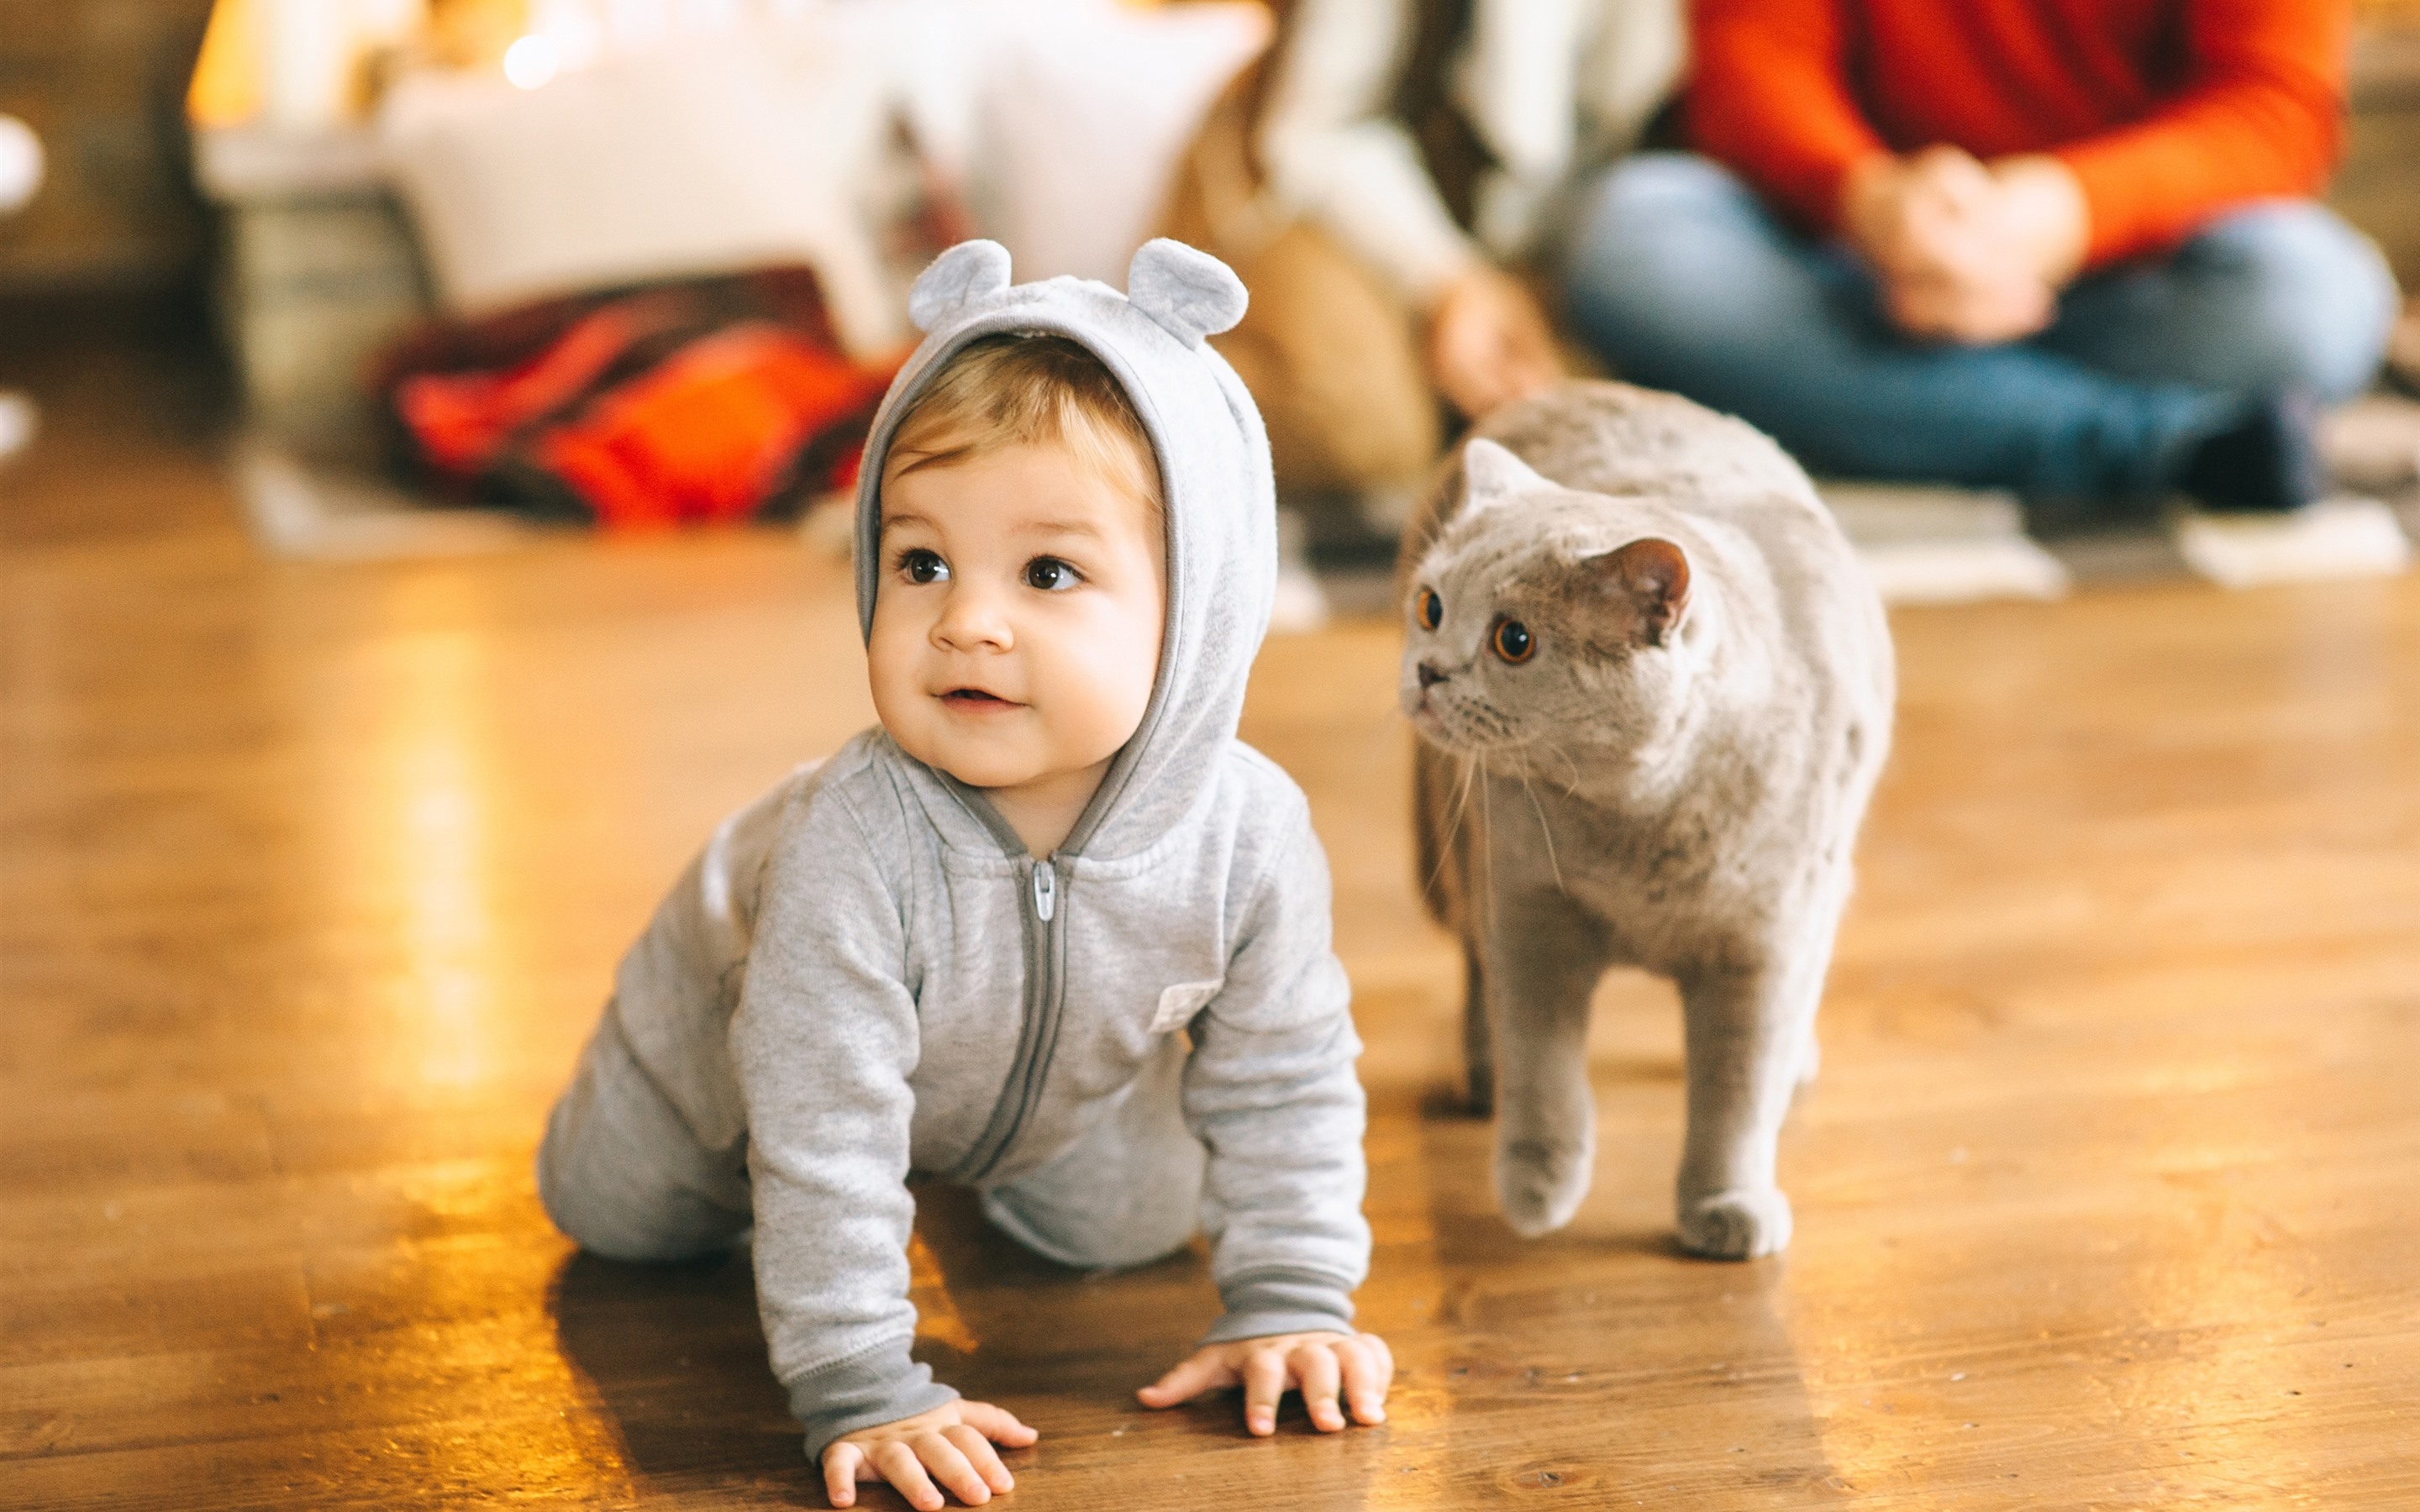 Wallpaper Cute Baby And Cat, Floor - Cute Baby With Cat Hd - HD Wallpaper 